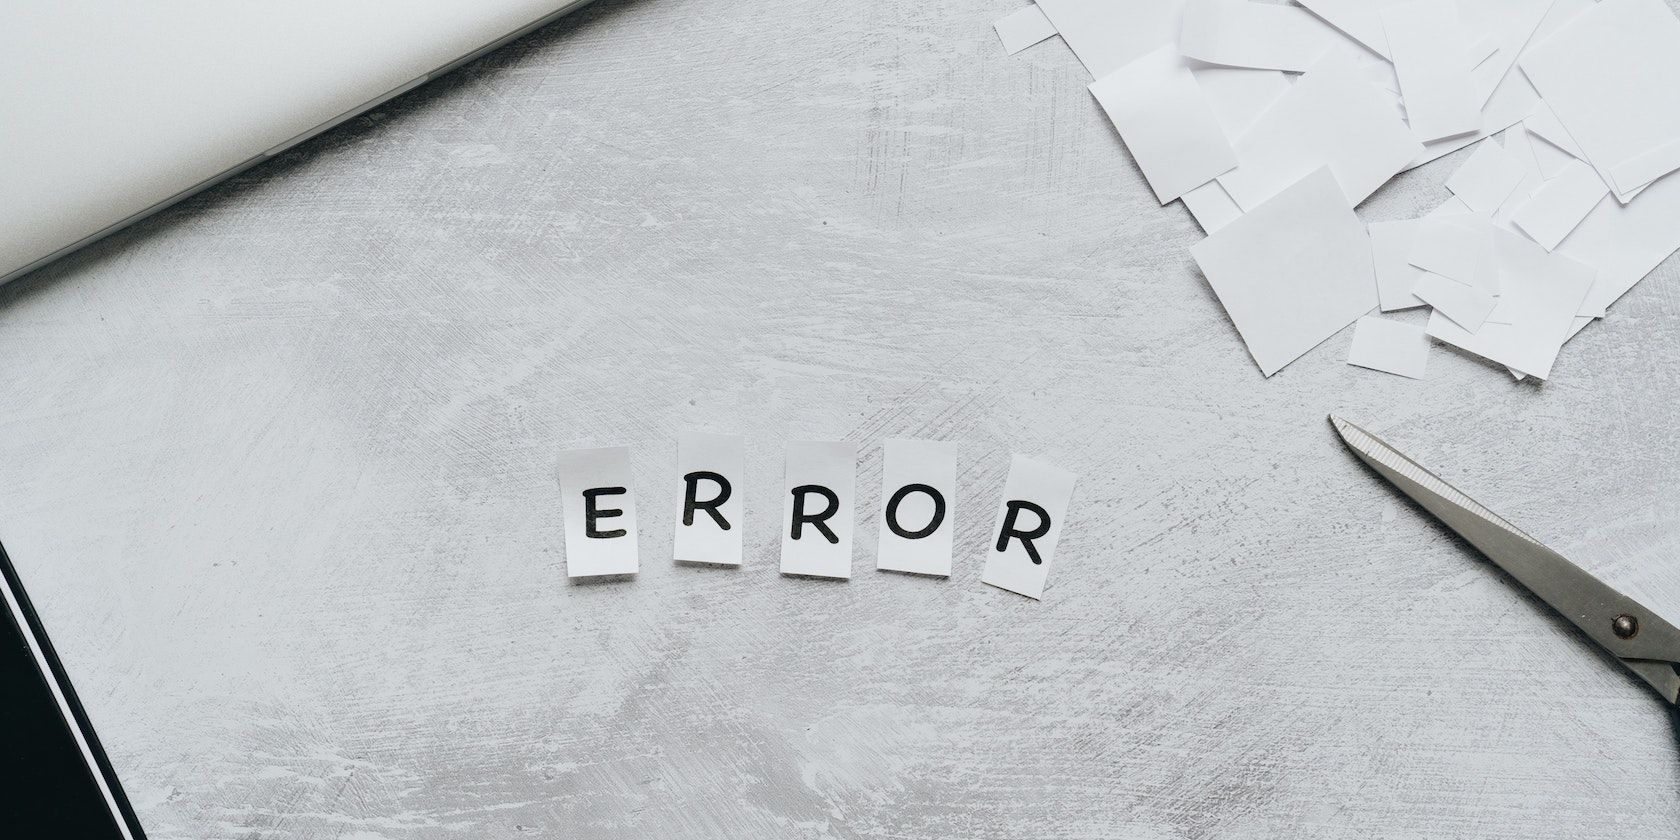 Individual letters on small pieces of paper spell out the word “Error”